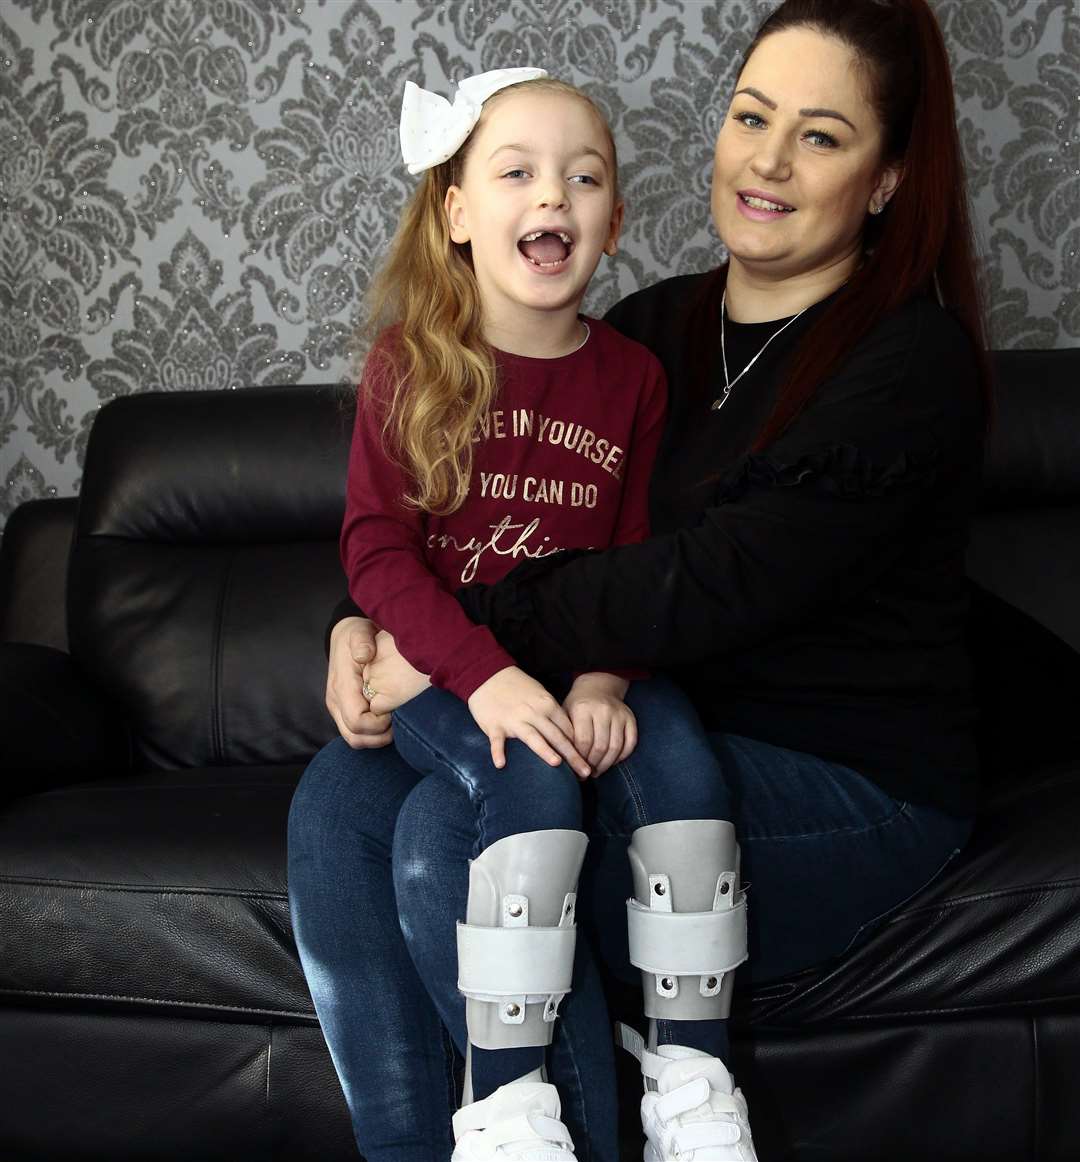 Lily-Mae Leadsham, 6, underwent life-changing surgery last year and is now able to dance, much to the delight of mum Kerry